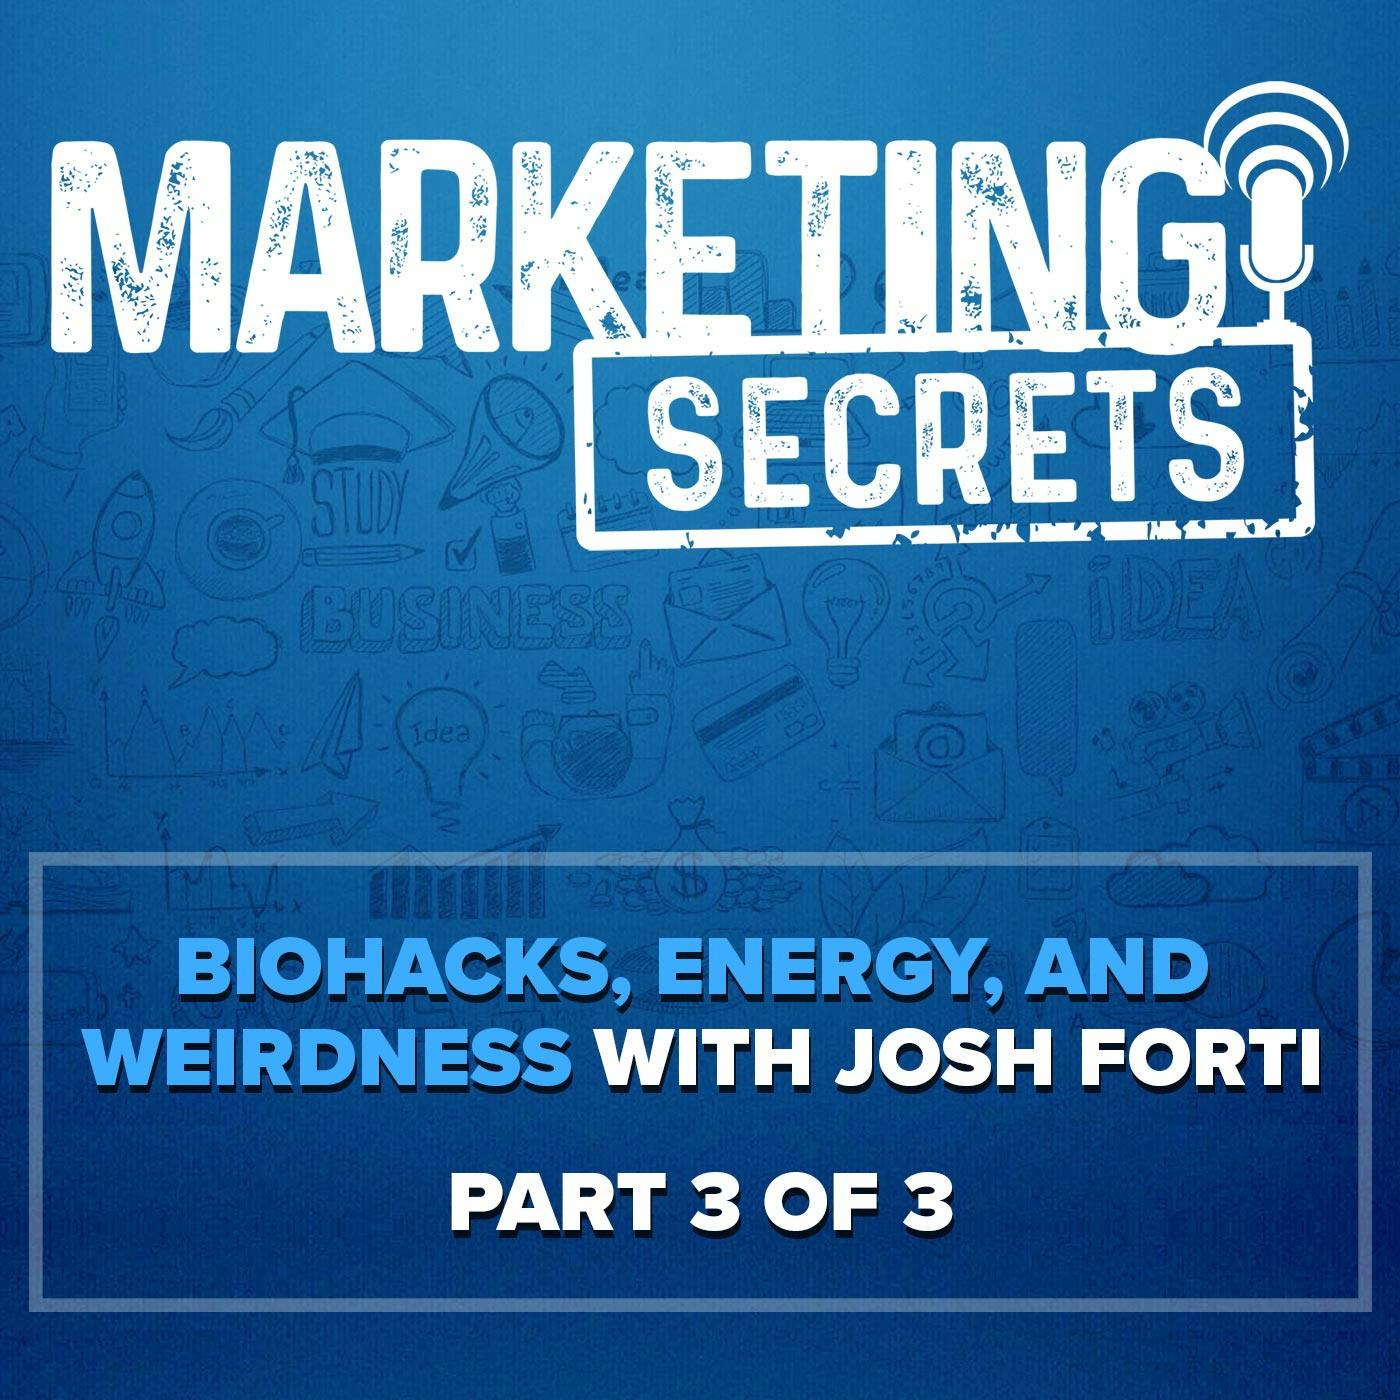 Biohacks, Energy, and Weirdness with Josh Forti, Part 3